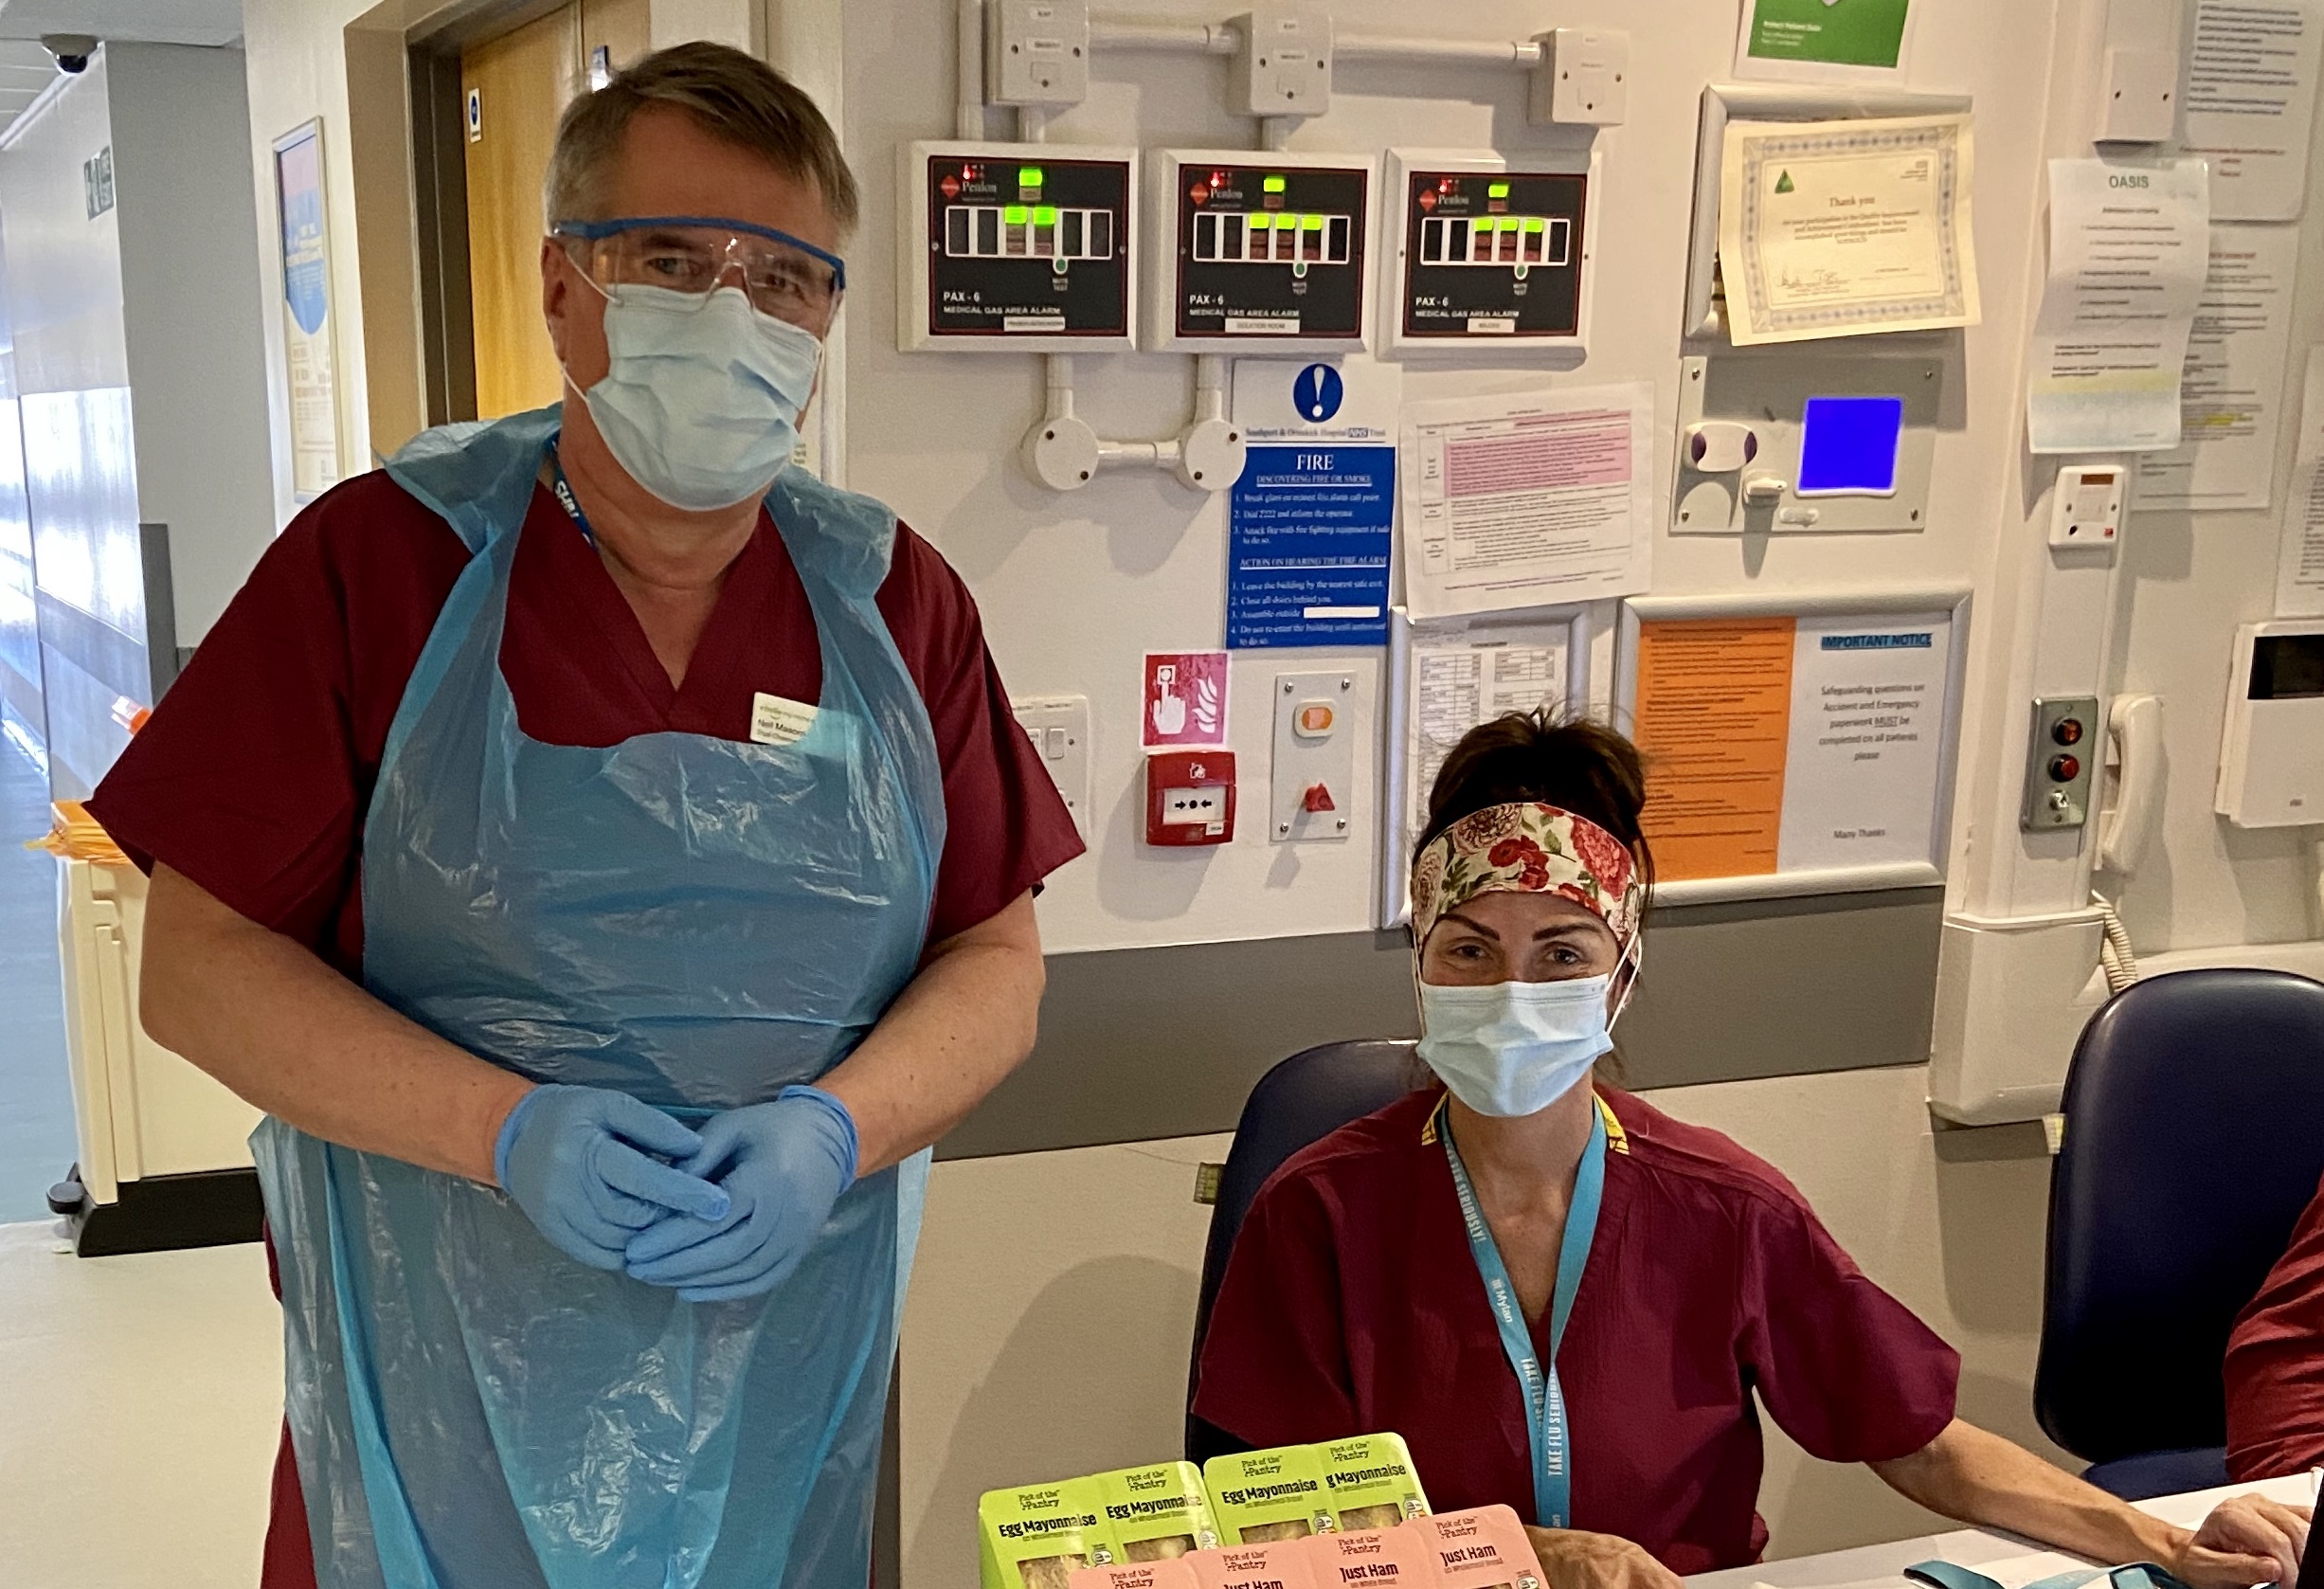 Chair of Southport and Ormskirk Hospital NHS Trust, Neil Masom, has been helping out in various roles to get a better understanding of life on the front line during the Covid-19 outbreak.